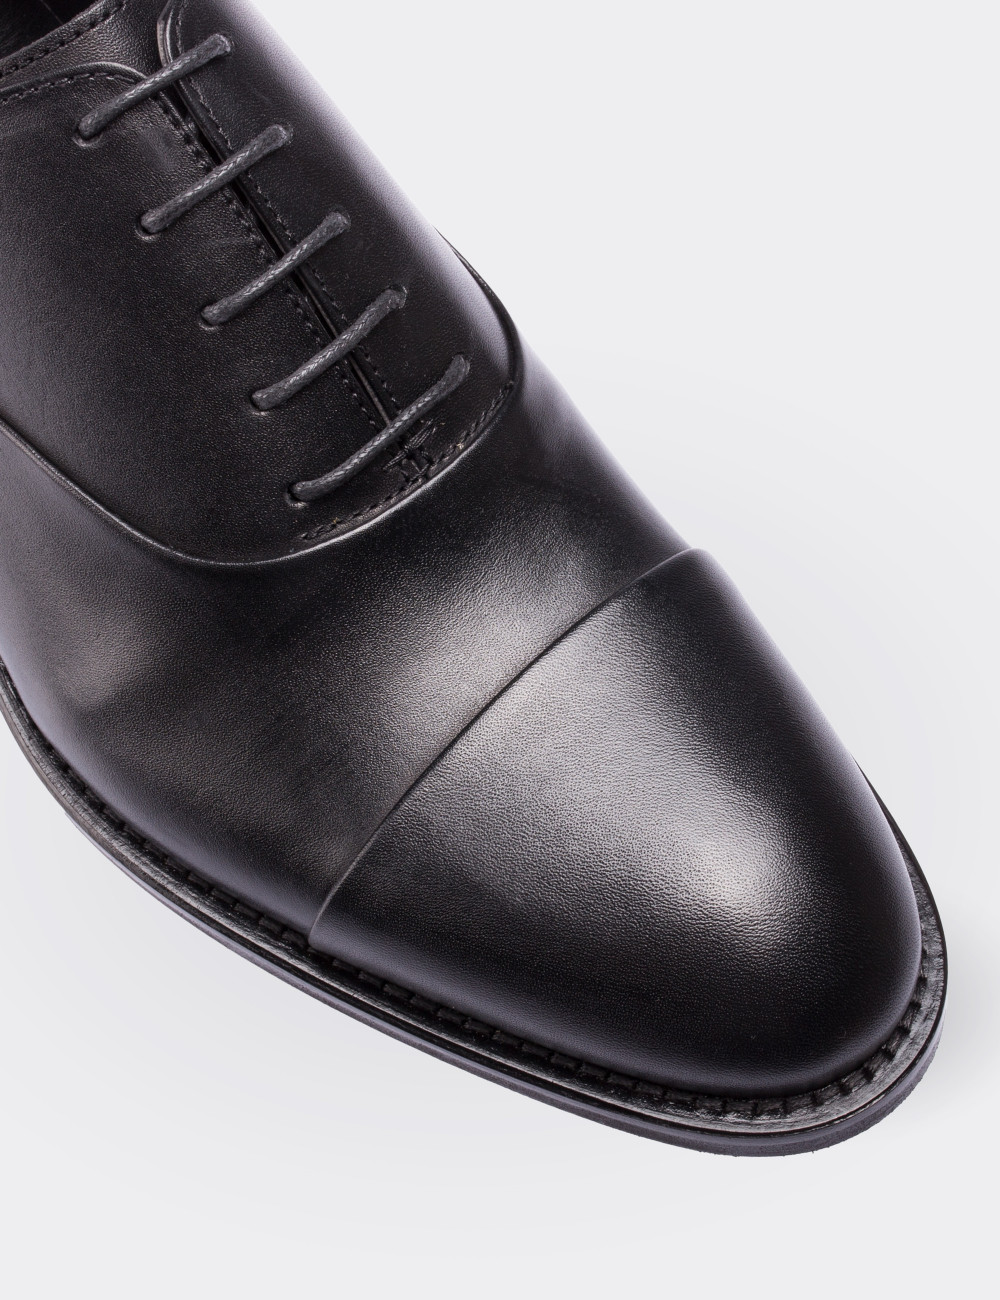 Black  Leather Classic Shoes - 01026MSYHN01